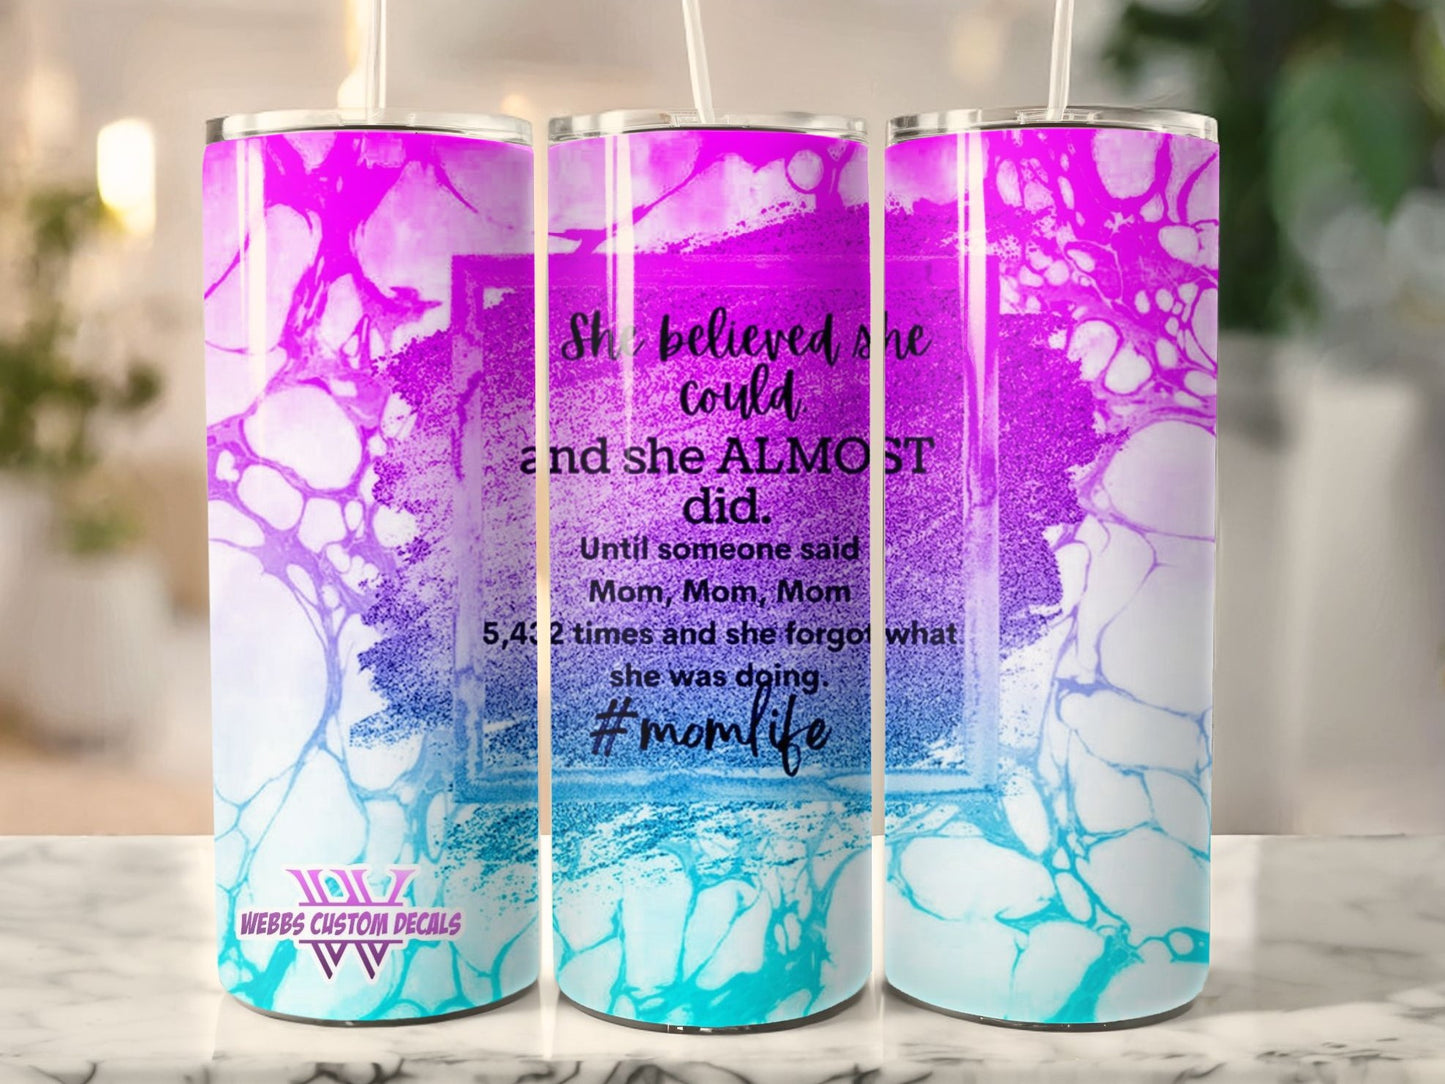 20-Ounce 'She Believes She Could' Tumbler: Pink and Blue Ink Water Effect for the Unstoppable Mom